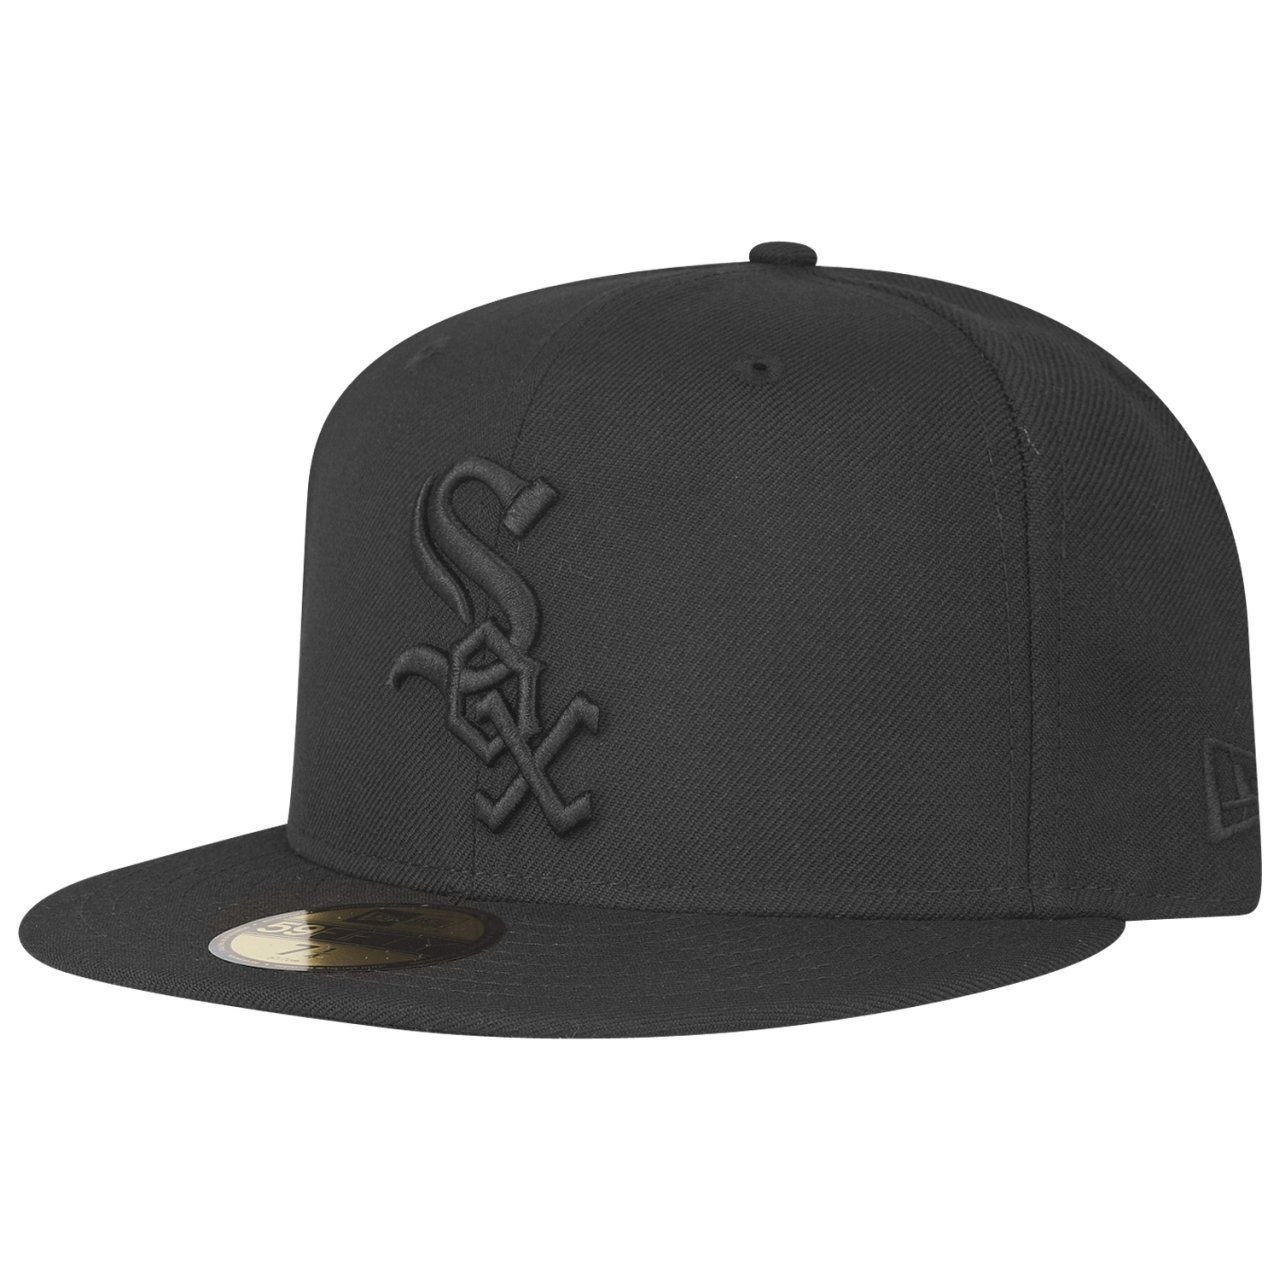 New MLB Era 59Fifty Chicago Sox Cap Fitted White